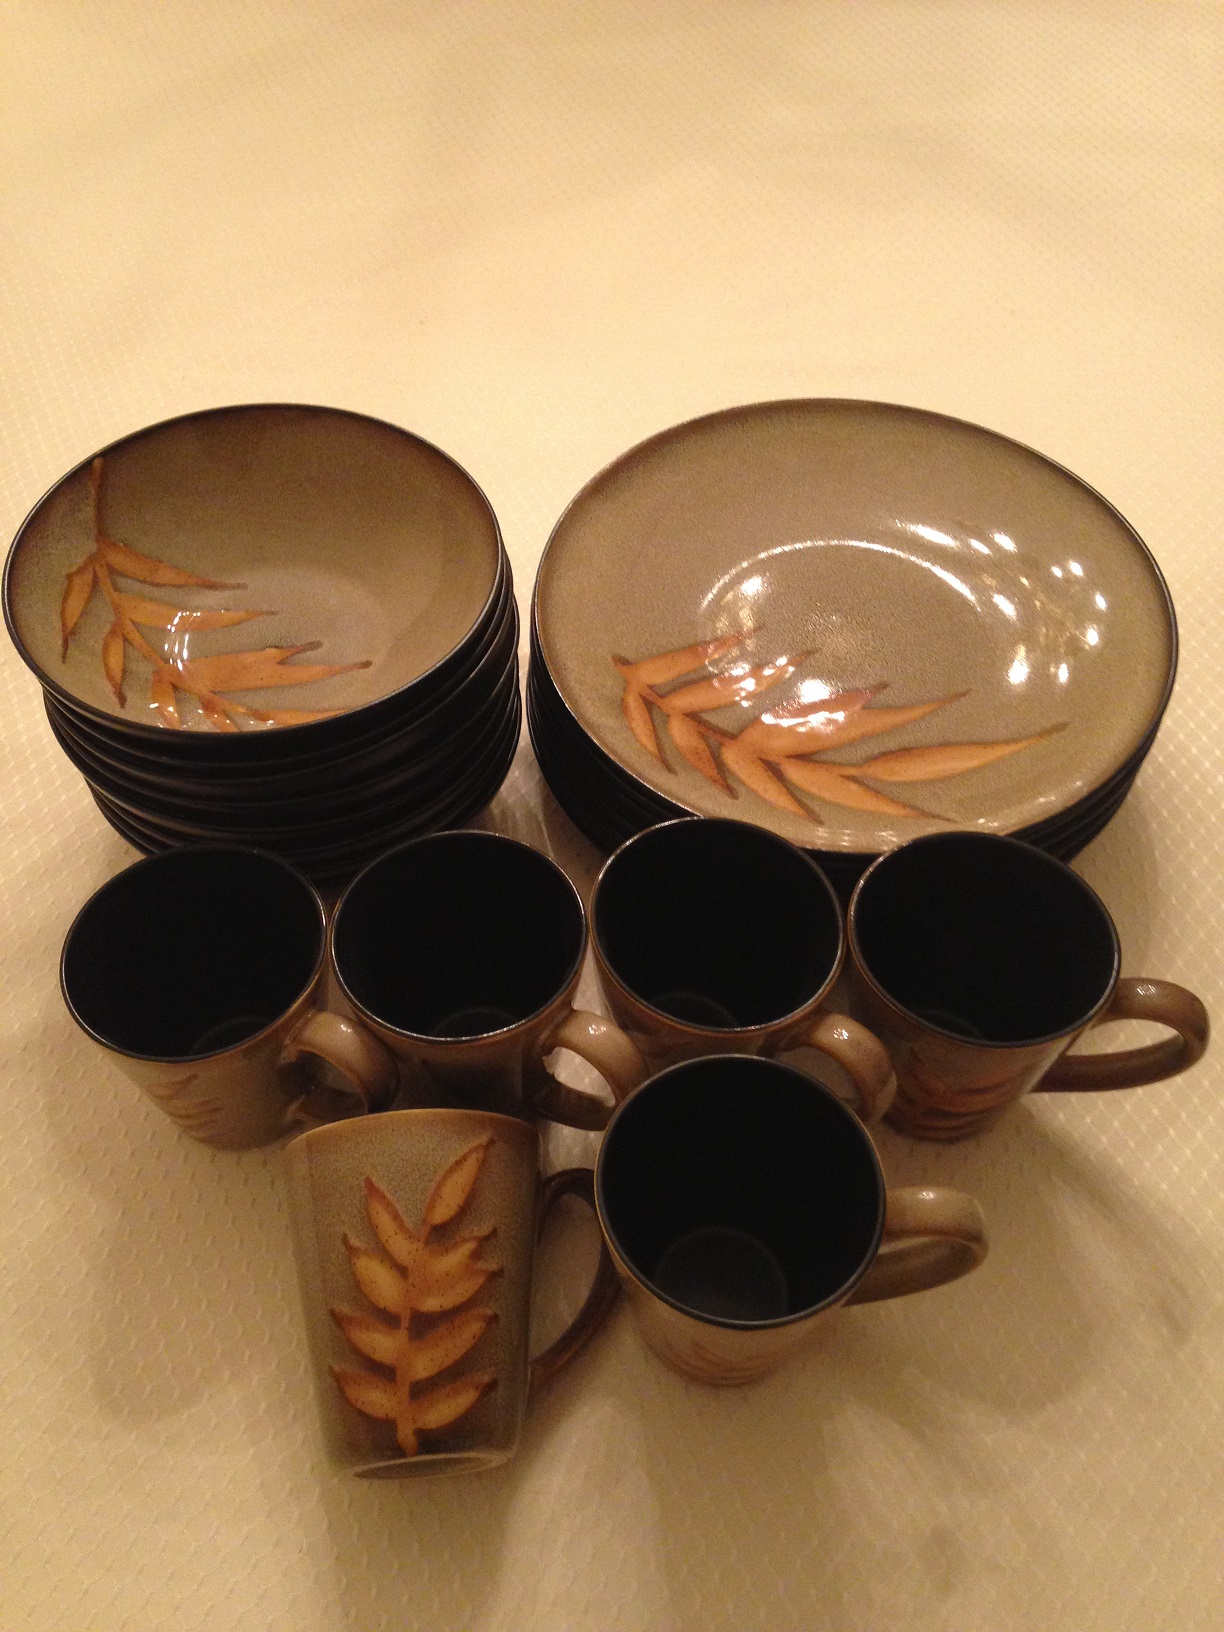 Used     Dinnerware Set of 6 inc Mugs, Cups, and Plates